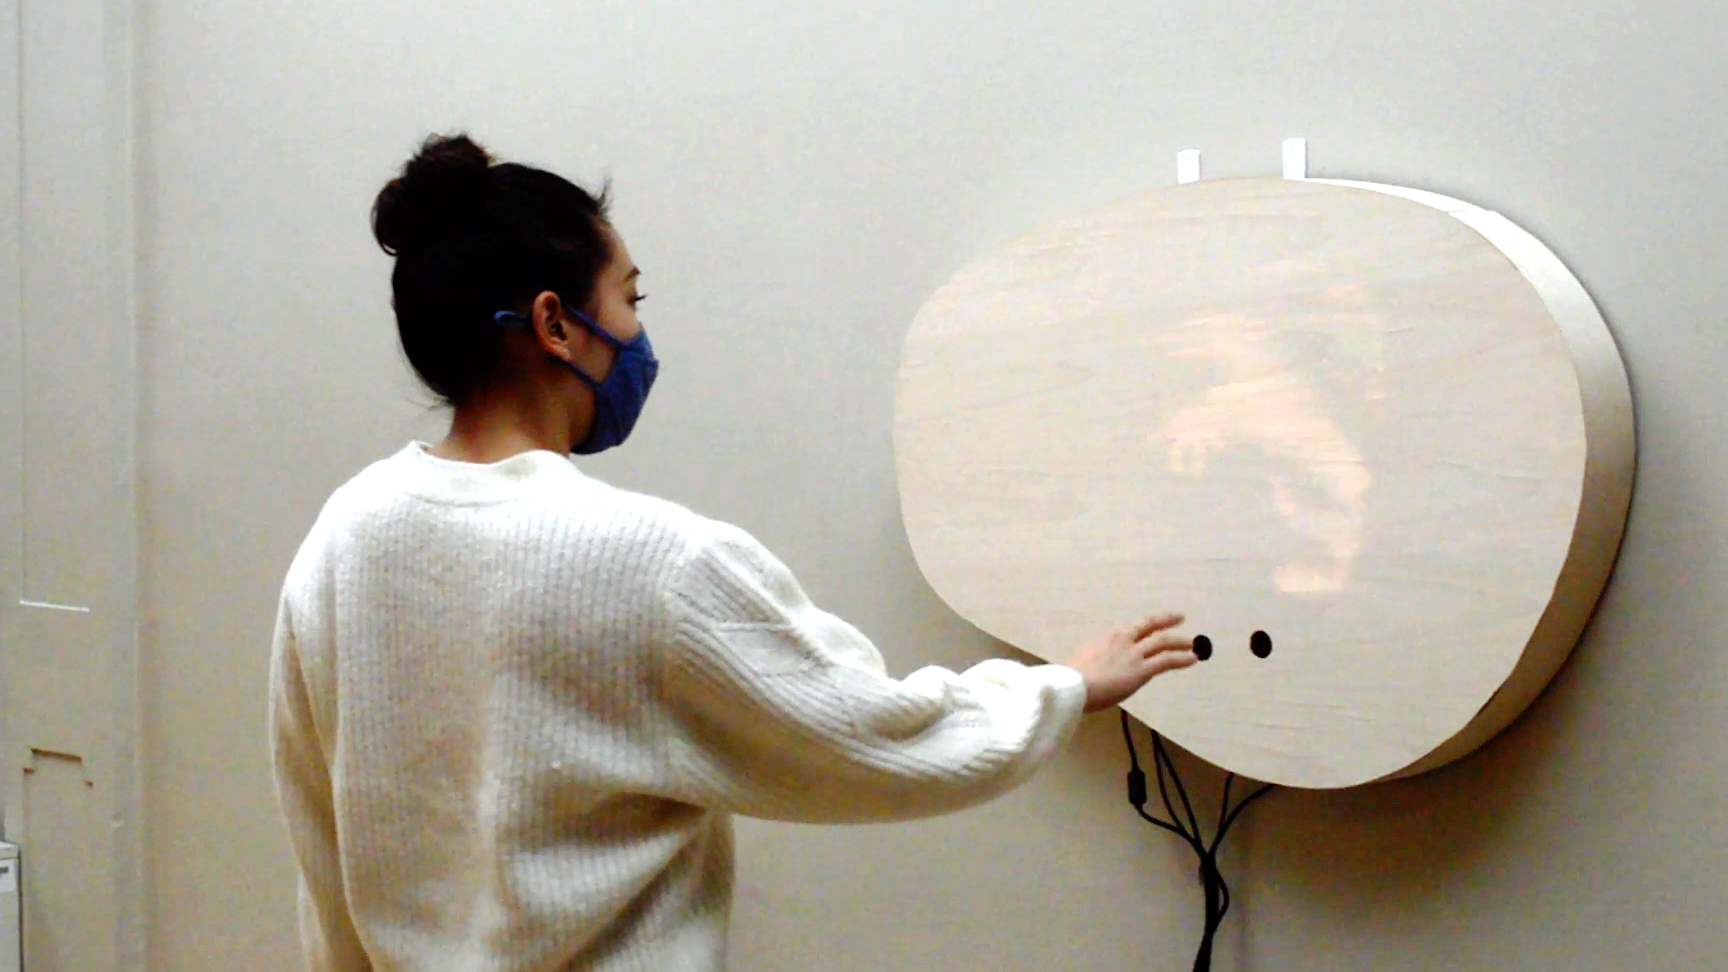 Time [in]Material: A Portal for Spatial Memories